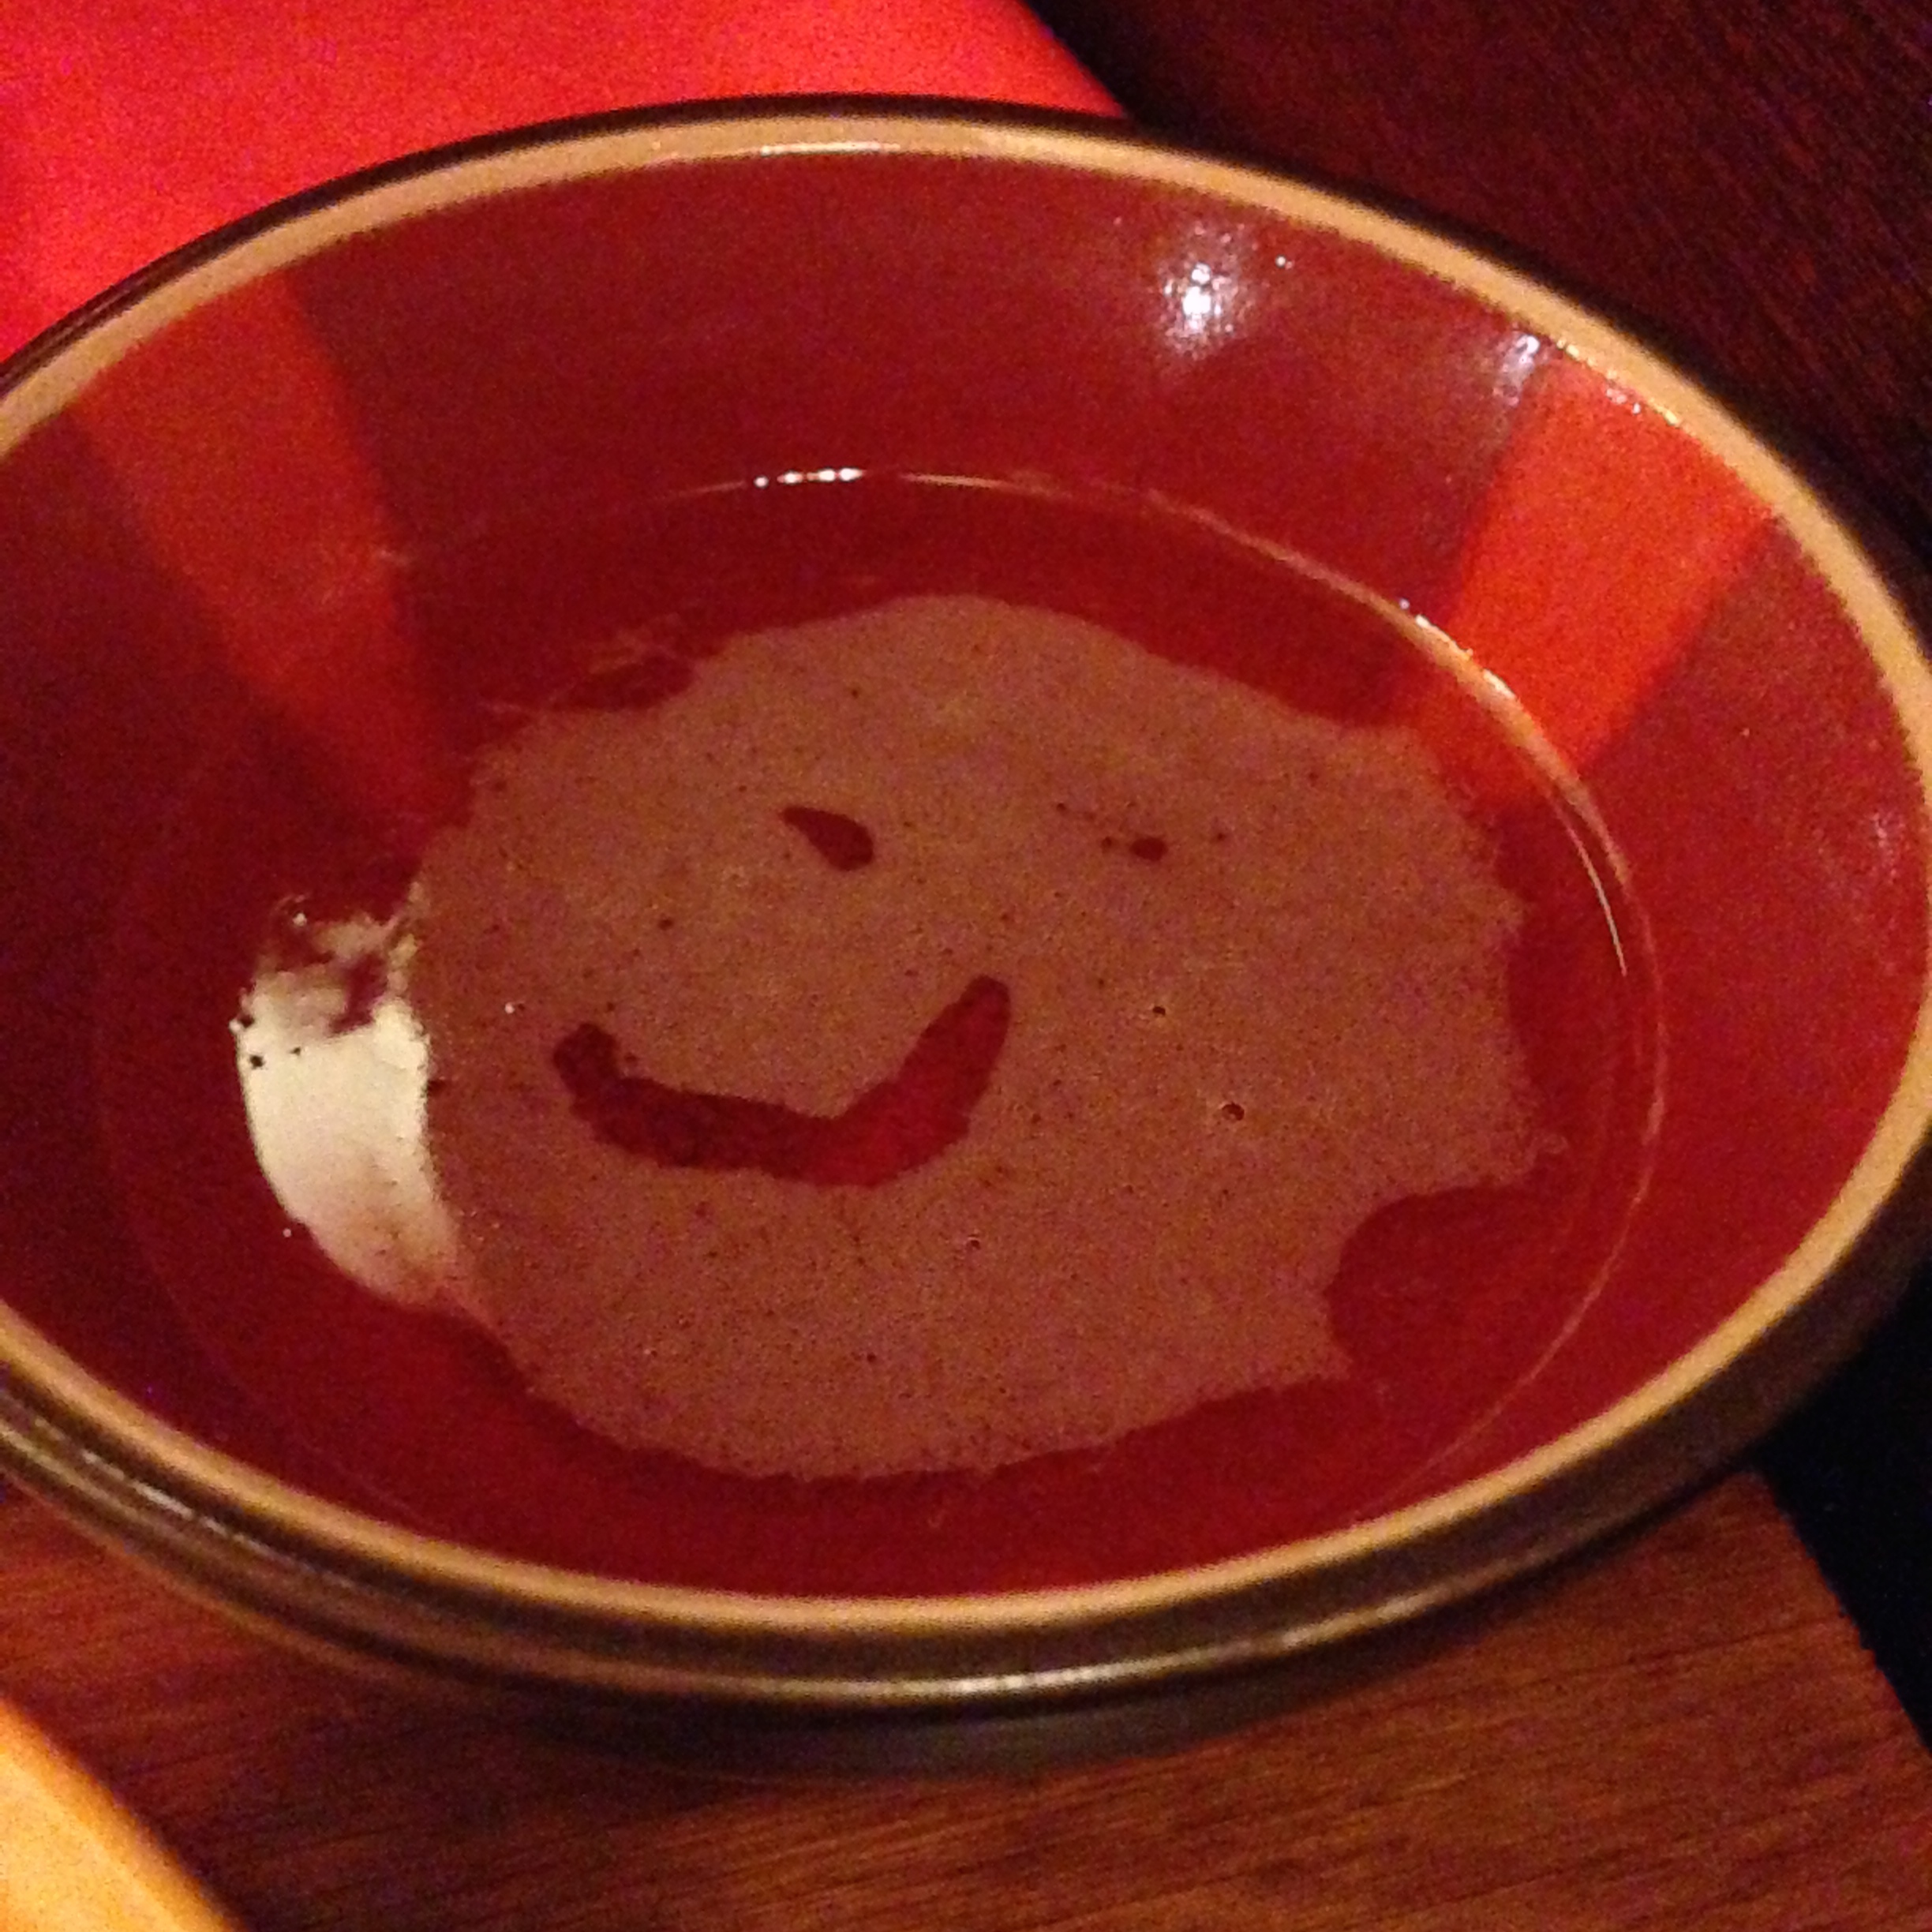  excuse me, waiter...there's a happy face in my cider! :o) 